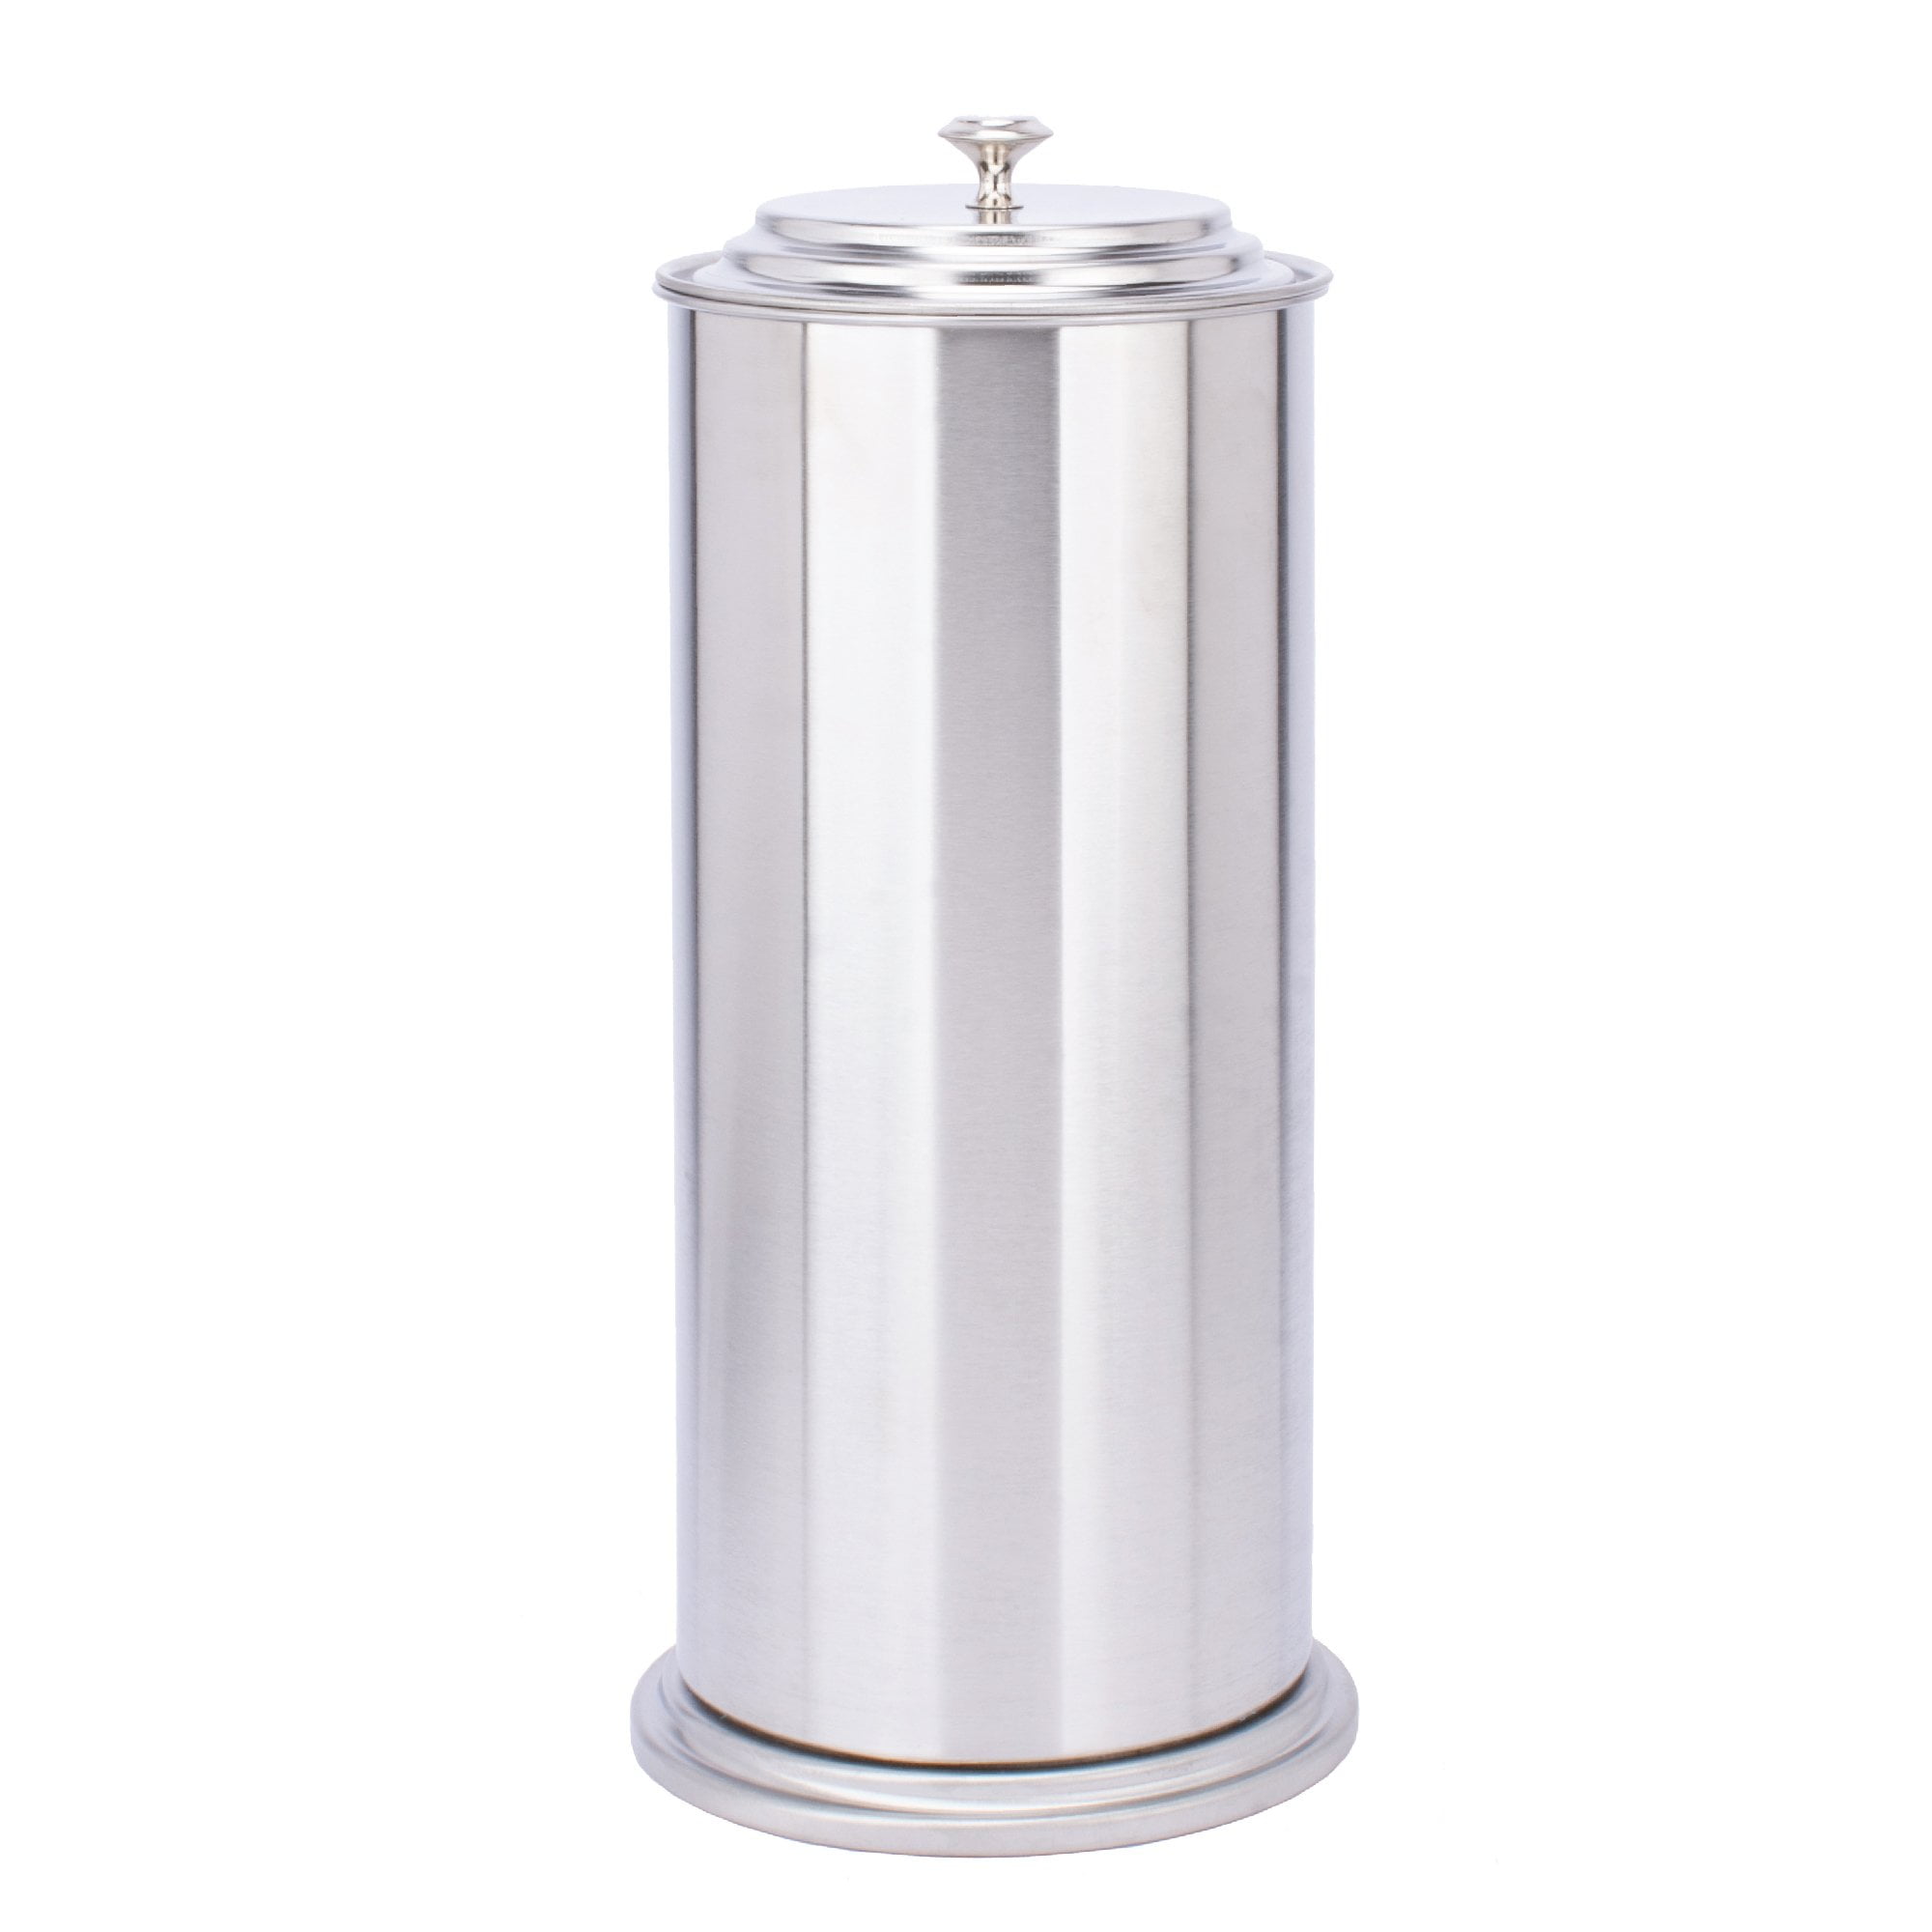 Freestanding Toilet Paper Holder Canister for Large and Extra Large Rolls  by JS Jackson Supplies